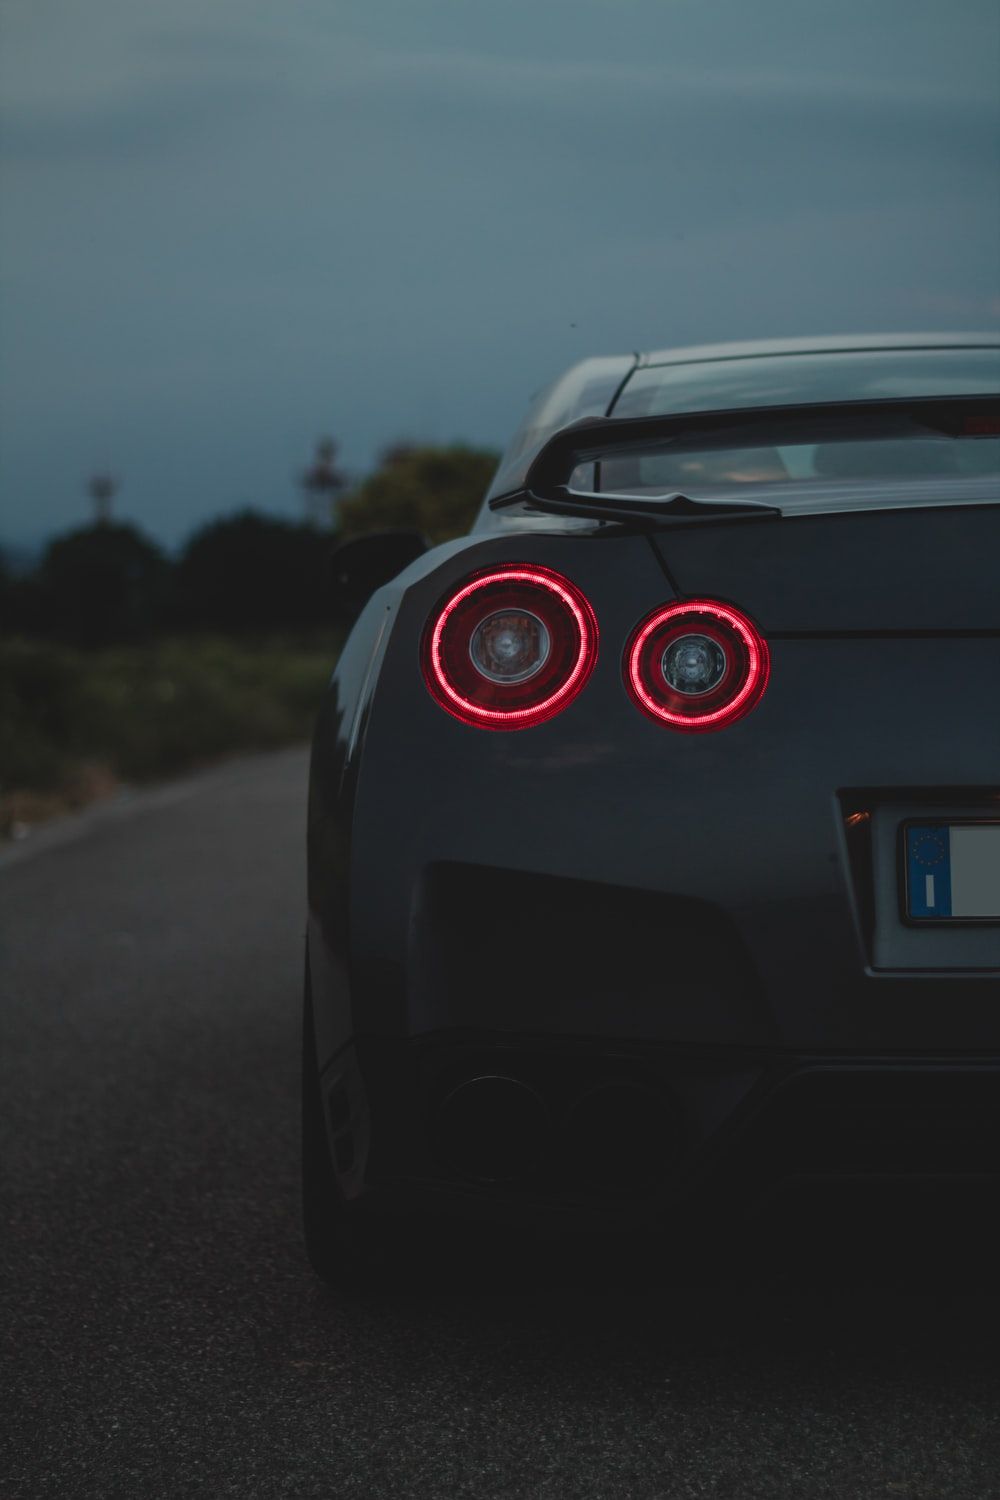 Nissan R35 Gtr Picture. Download Free Image